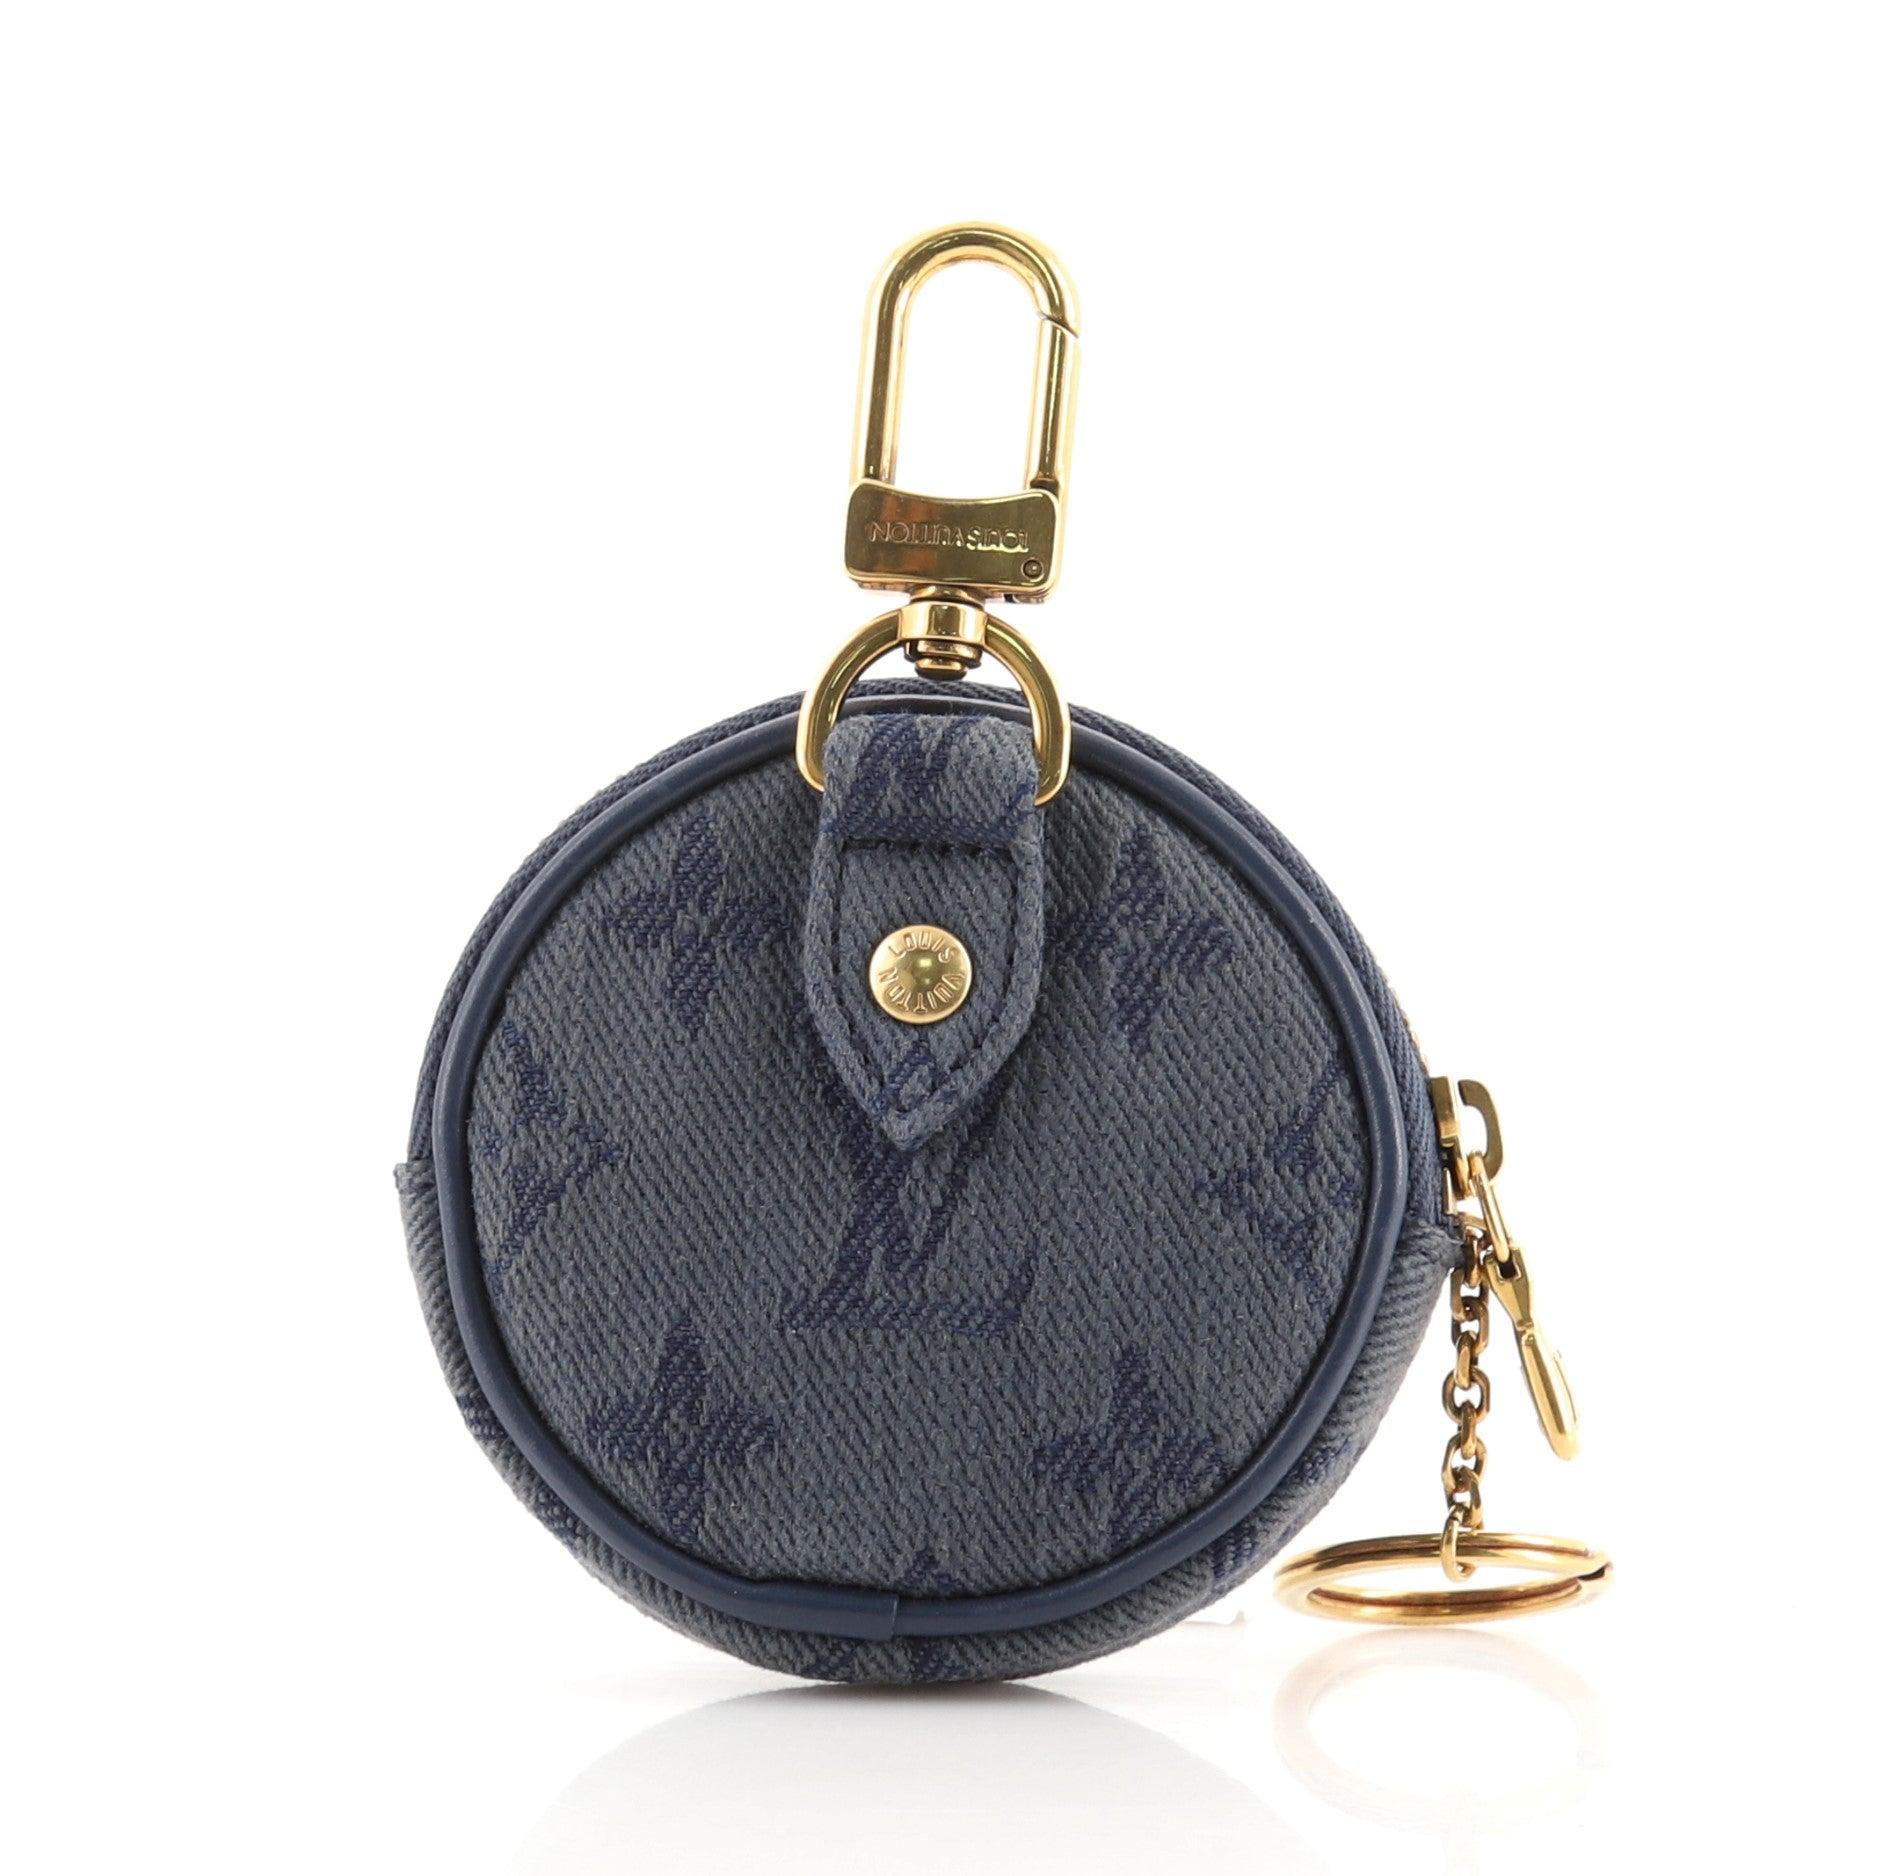 Louis Vuitton Navy Blue Monogram Denim Round Bag Charm and Key Holder

Condition Details: Odor in interior. Moderate wear and discoloration on exterior, slight splitting on interior side corner, scratches and tarnish on